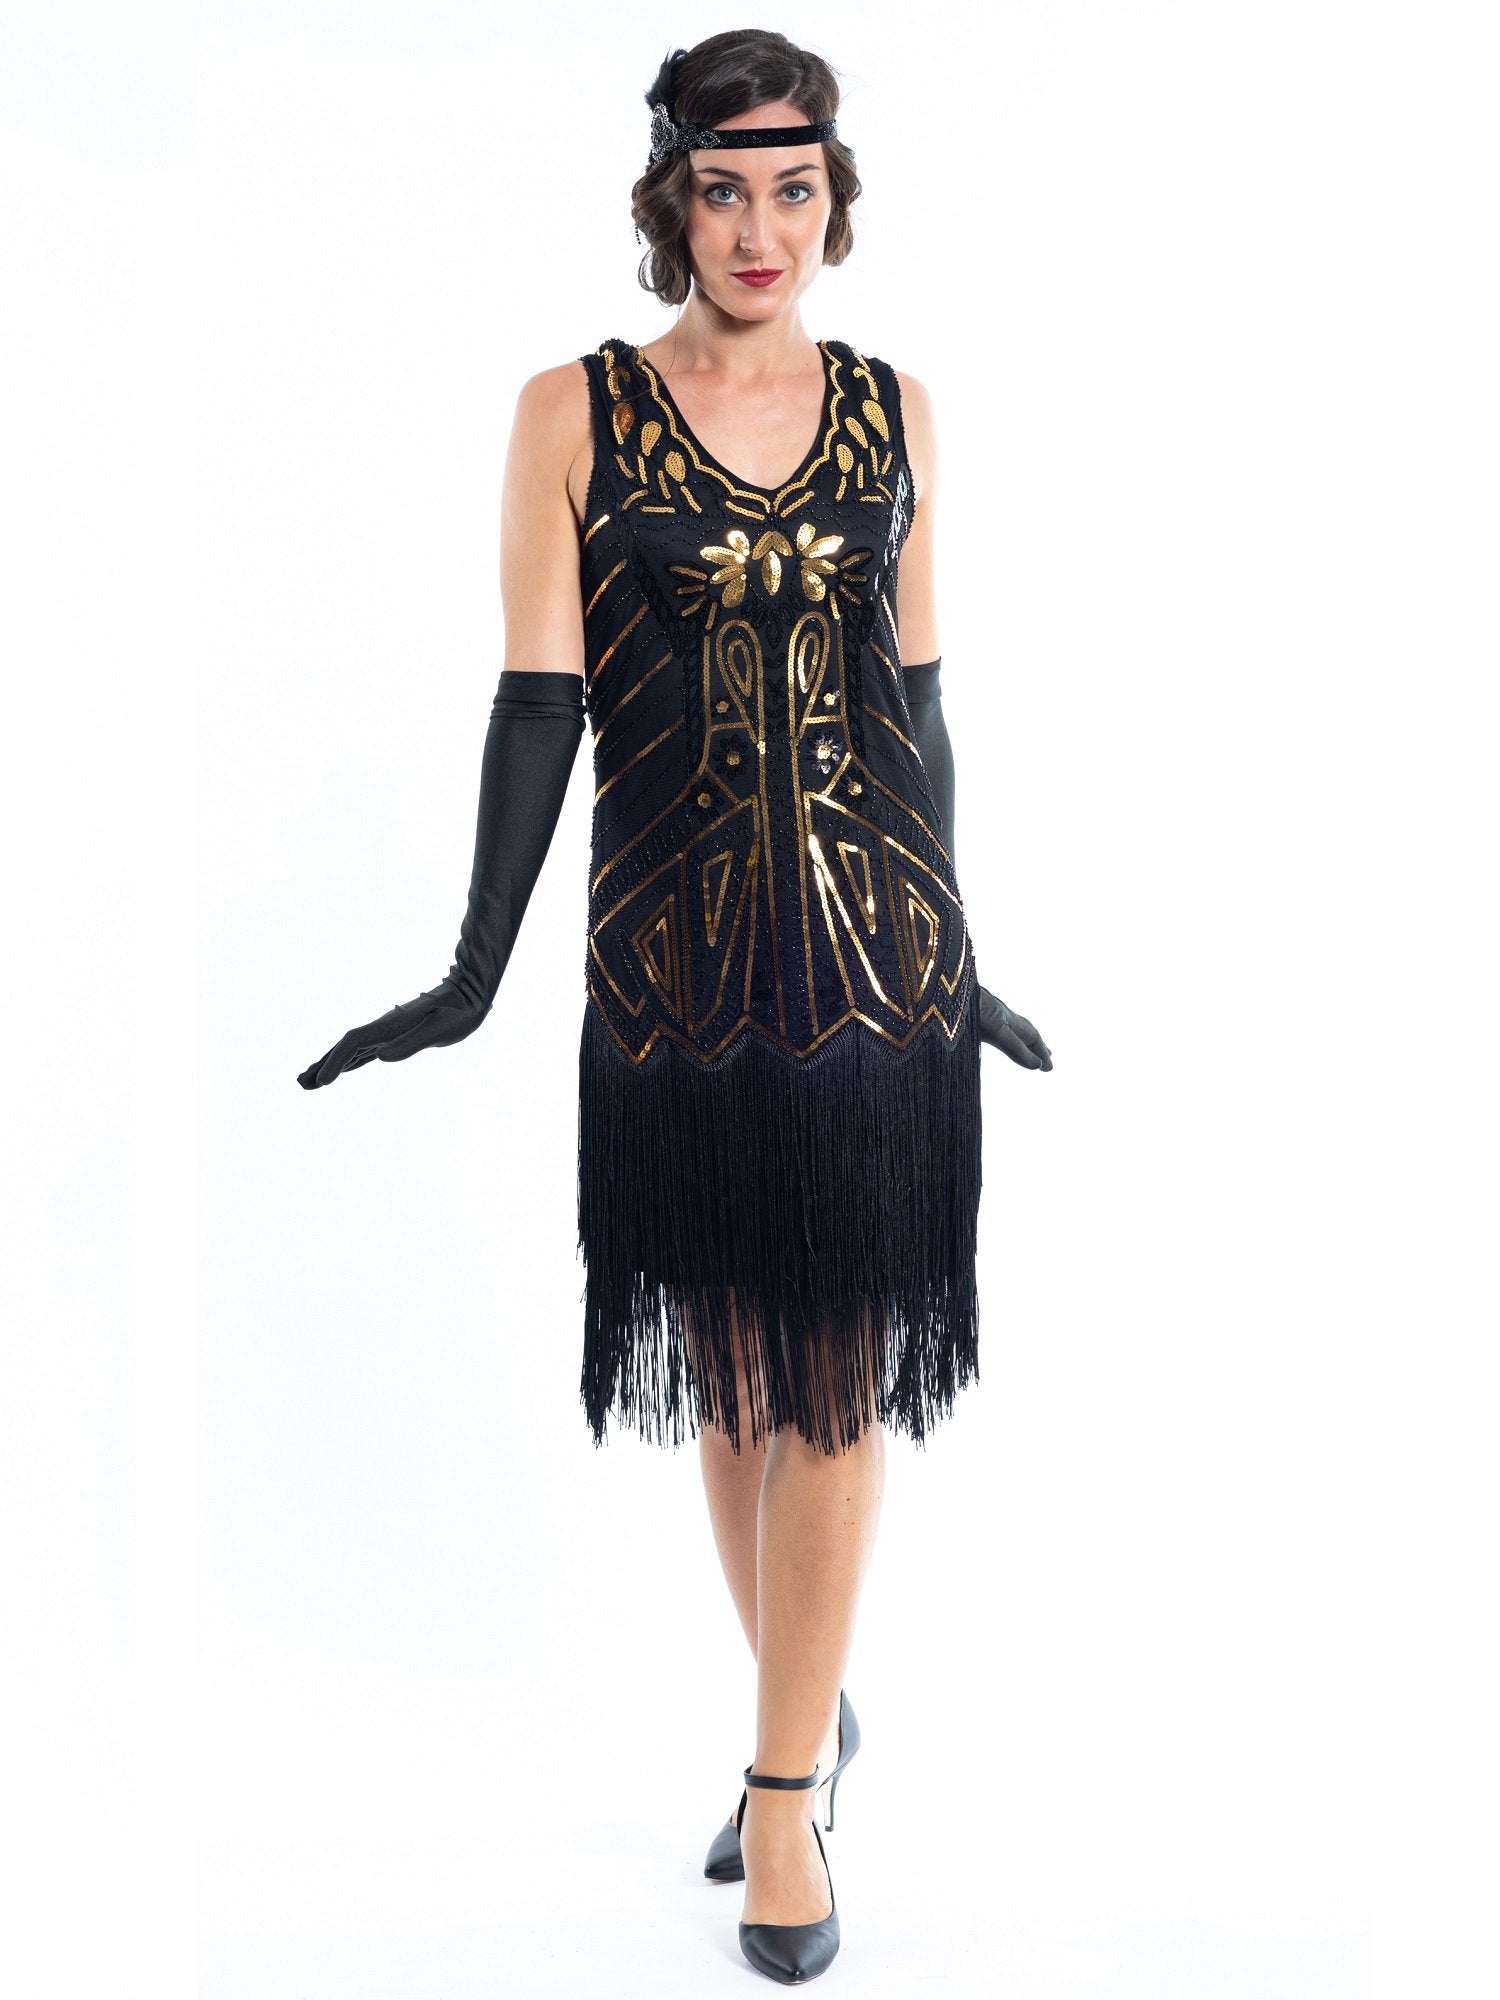 A black flapper dress with gold sequins, beads and black fringes around the hem